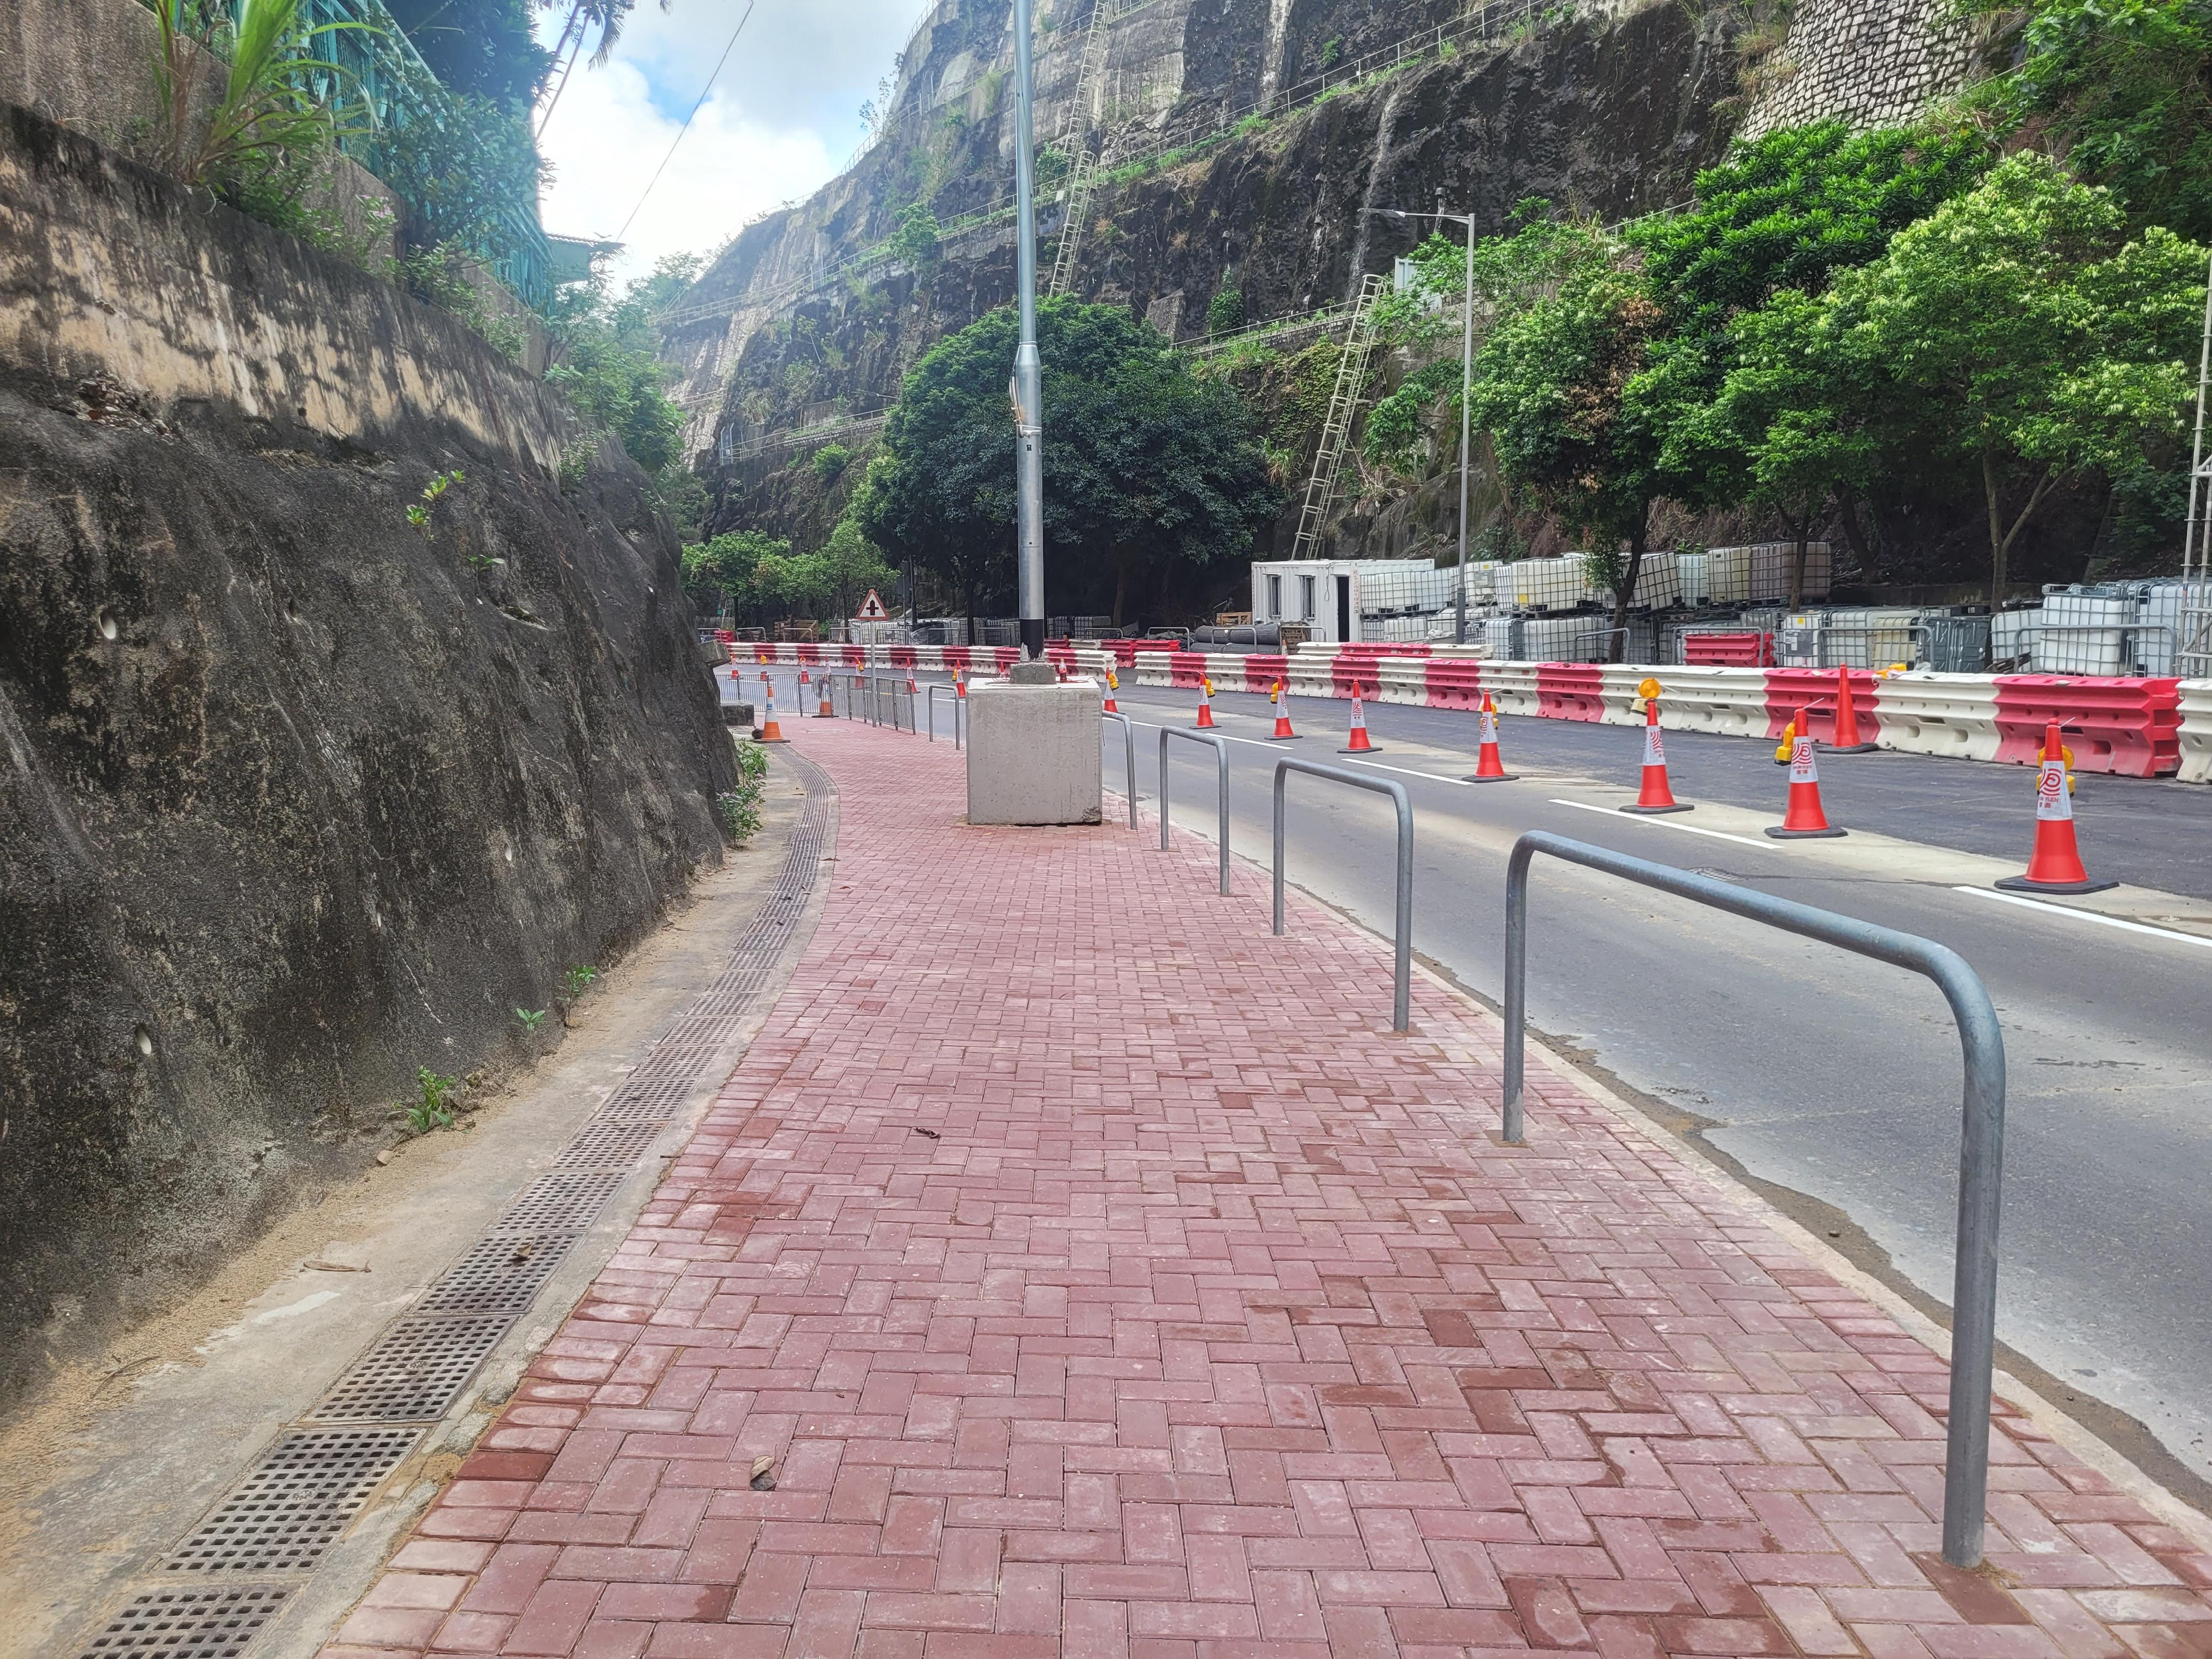 The Highways Department today (June 28) announced that Yiu Hing Road will fully resume traffic on June 30 (Sunday). Photo shows the relevant footpath section of Yiu Hing Road with reinstatement works completed.